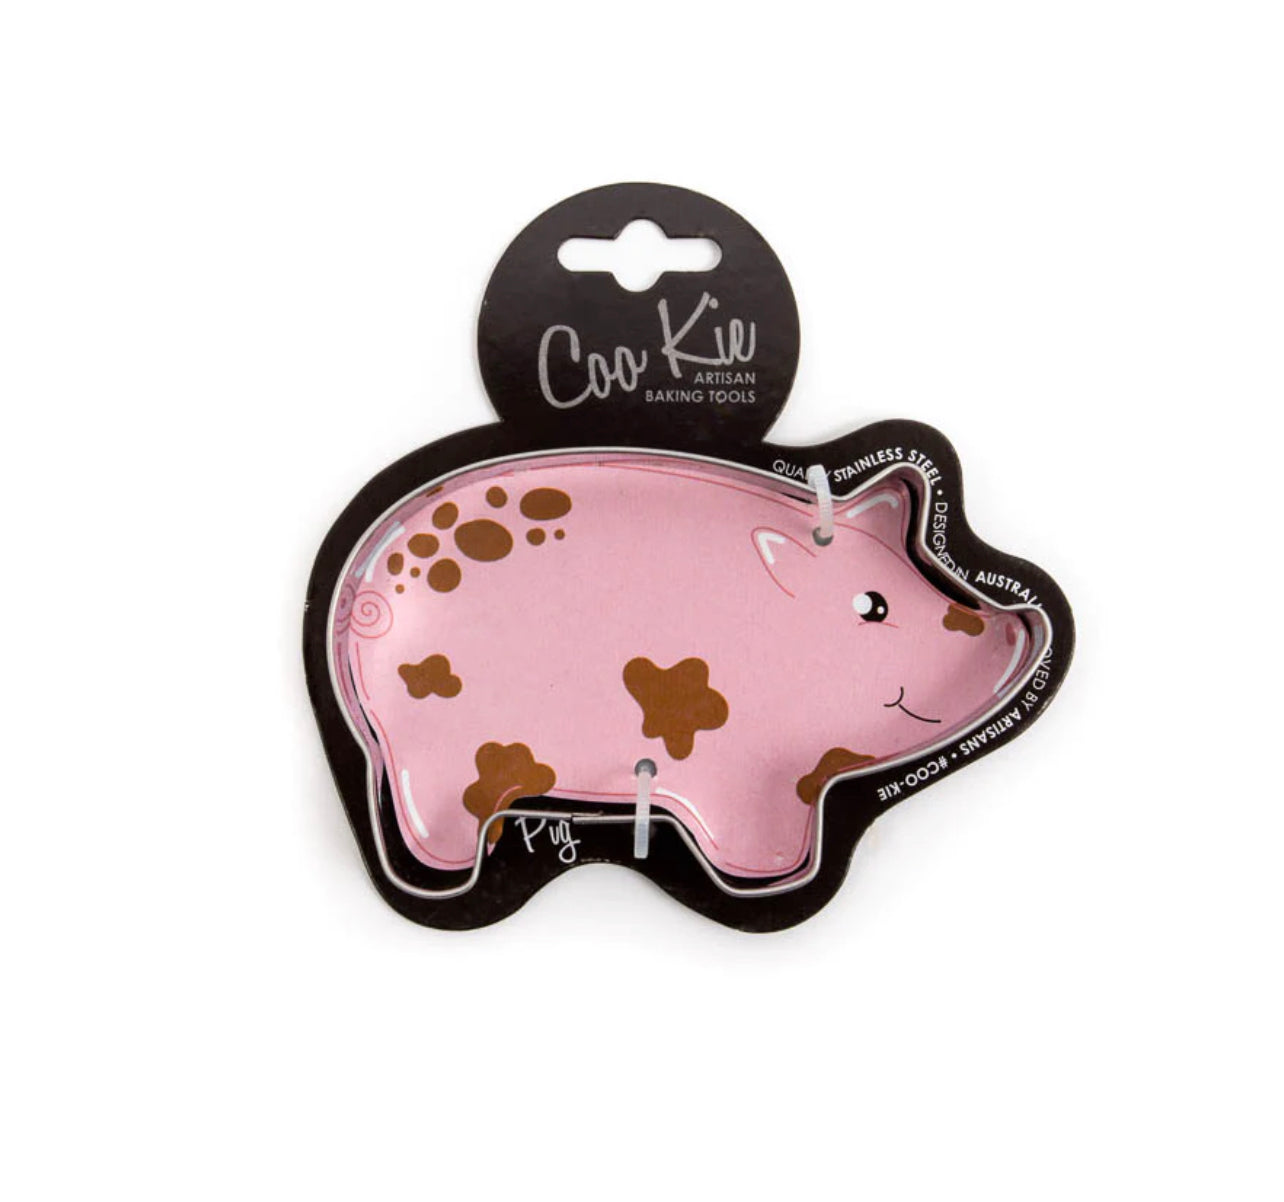 COO KIE PIG COOKIE CUTTER